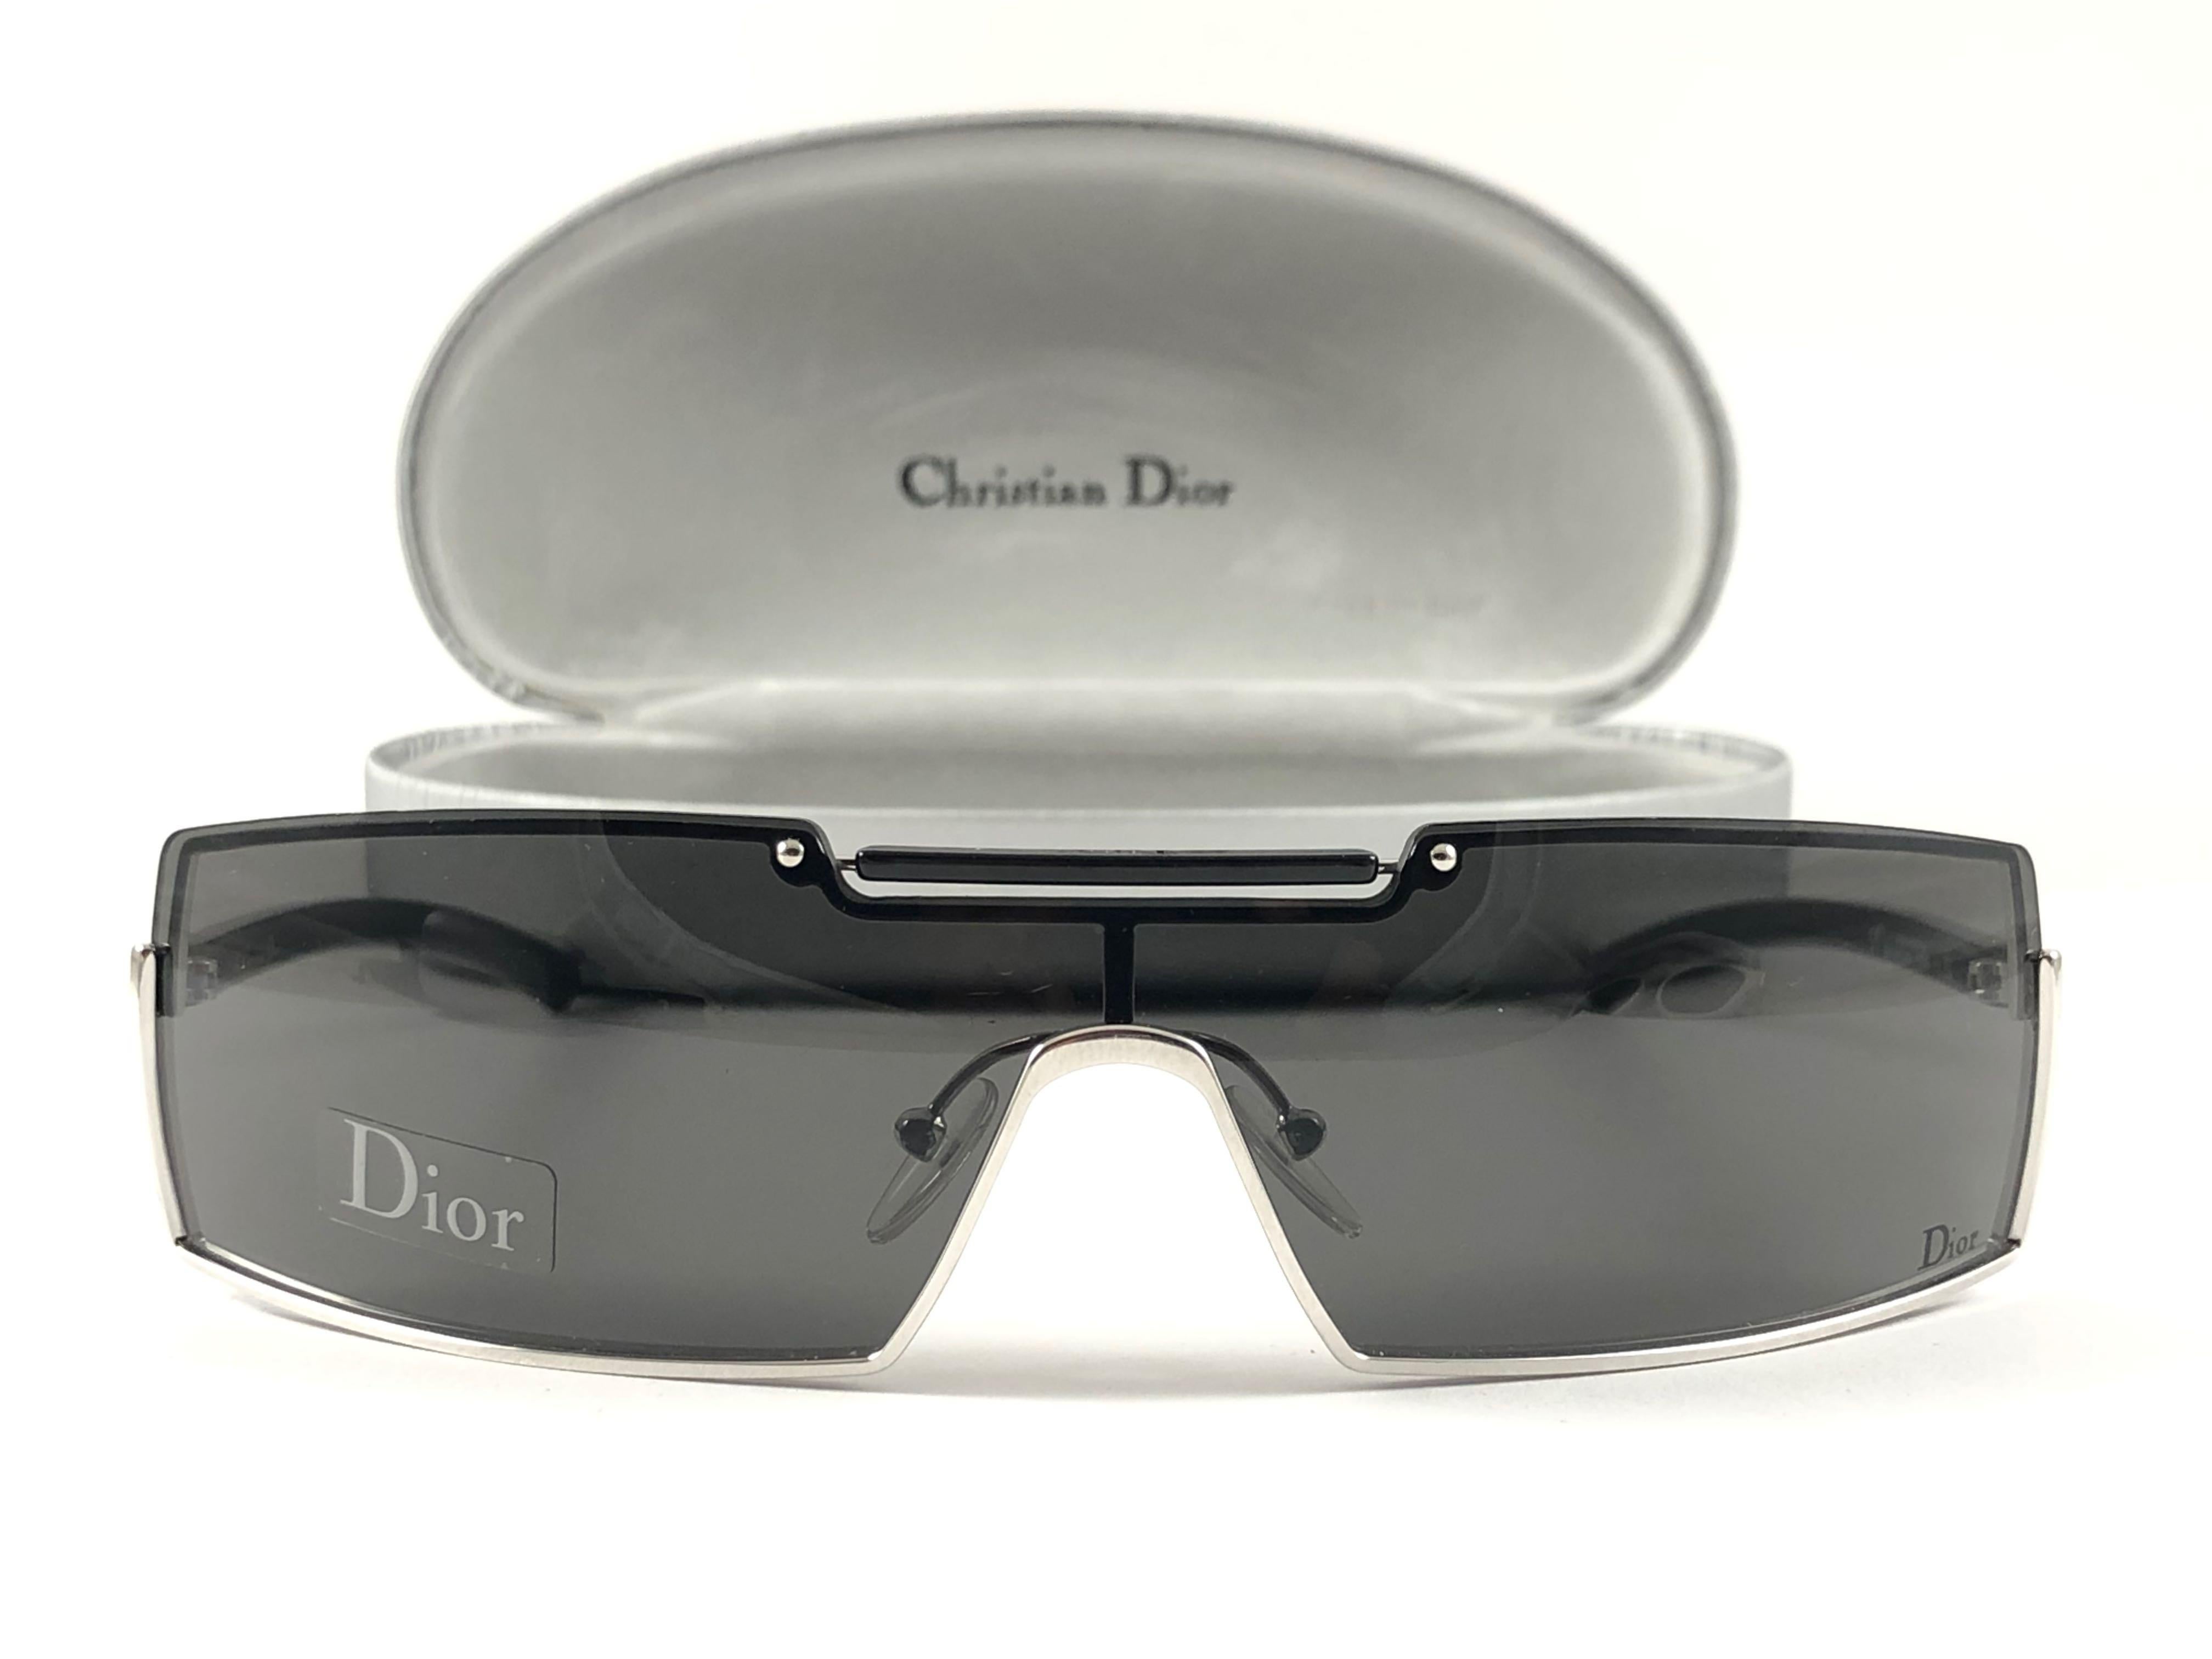  Vintage Christian Dior wrap around frame sporting medium grey lenses. 

Made in Austria.
 
This piece show minor sign of wear due to  storage.

Front : 15.5 cms

Lens Height : 3.5 cms

Lens Width : 15.5 cms 